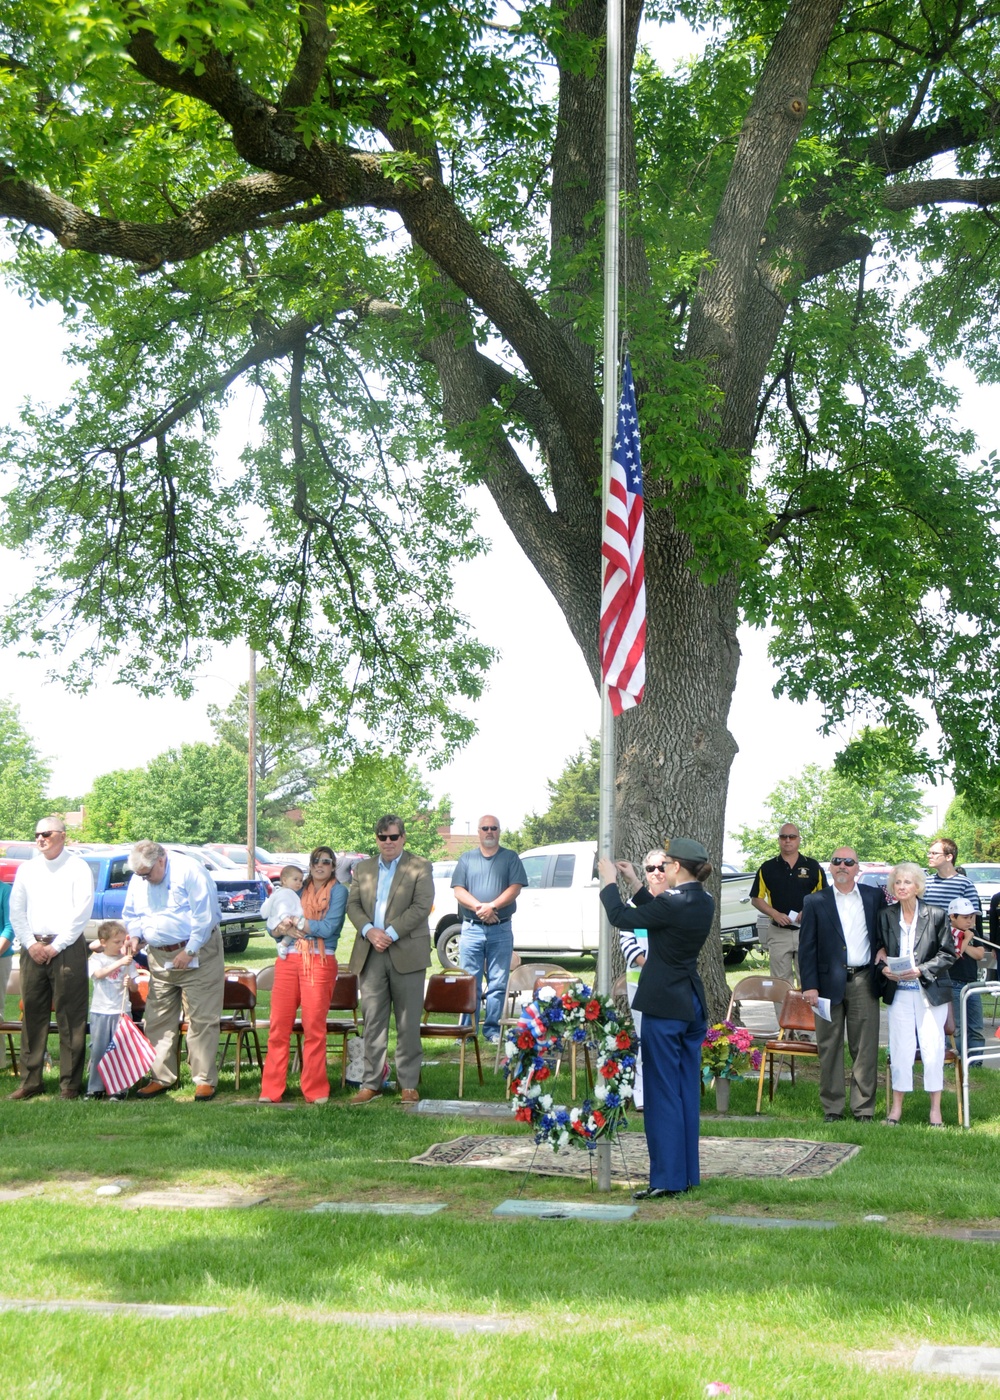 Camaraderie, community keep 26-year memorial tradition alive